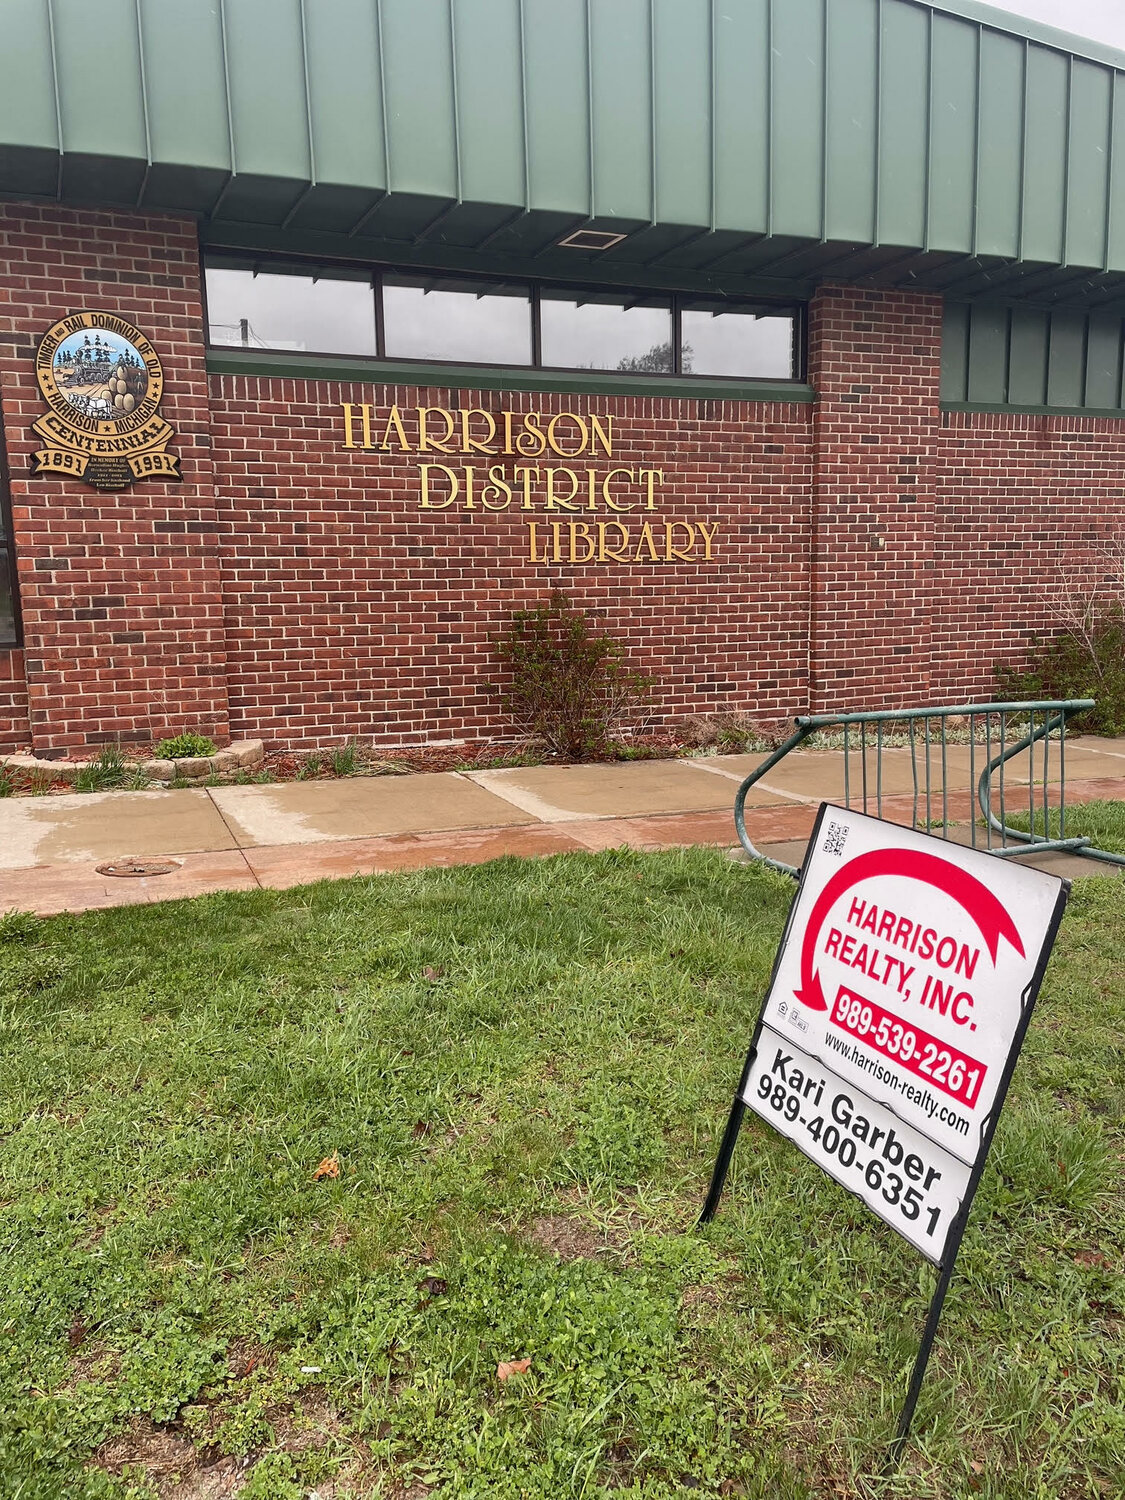 It’s official...the Harrison District Library’s building is on the market, and the new library site in the former Surrey House is nearly ready for occupancy.